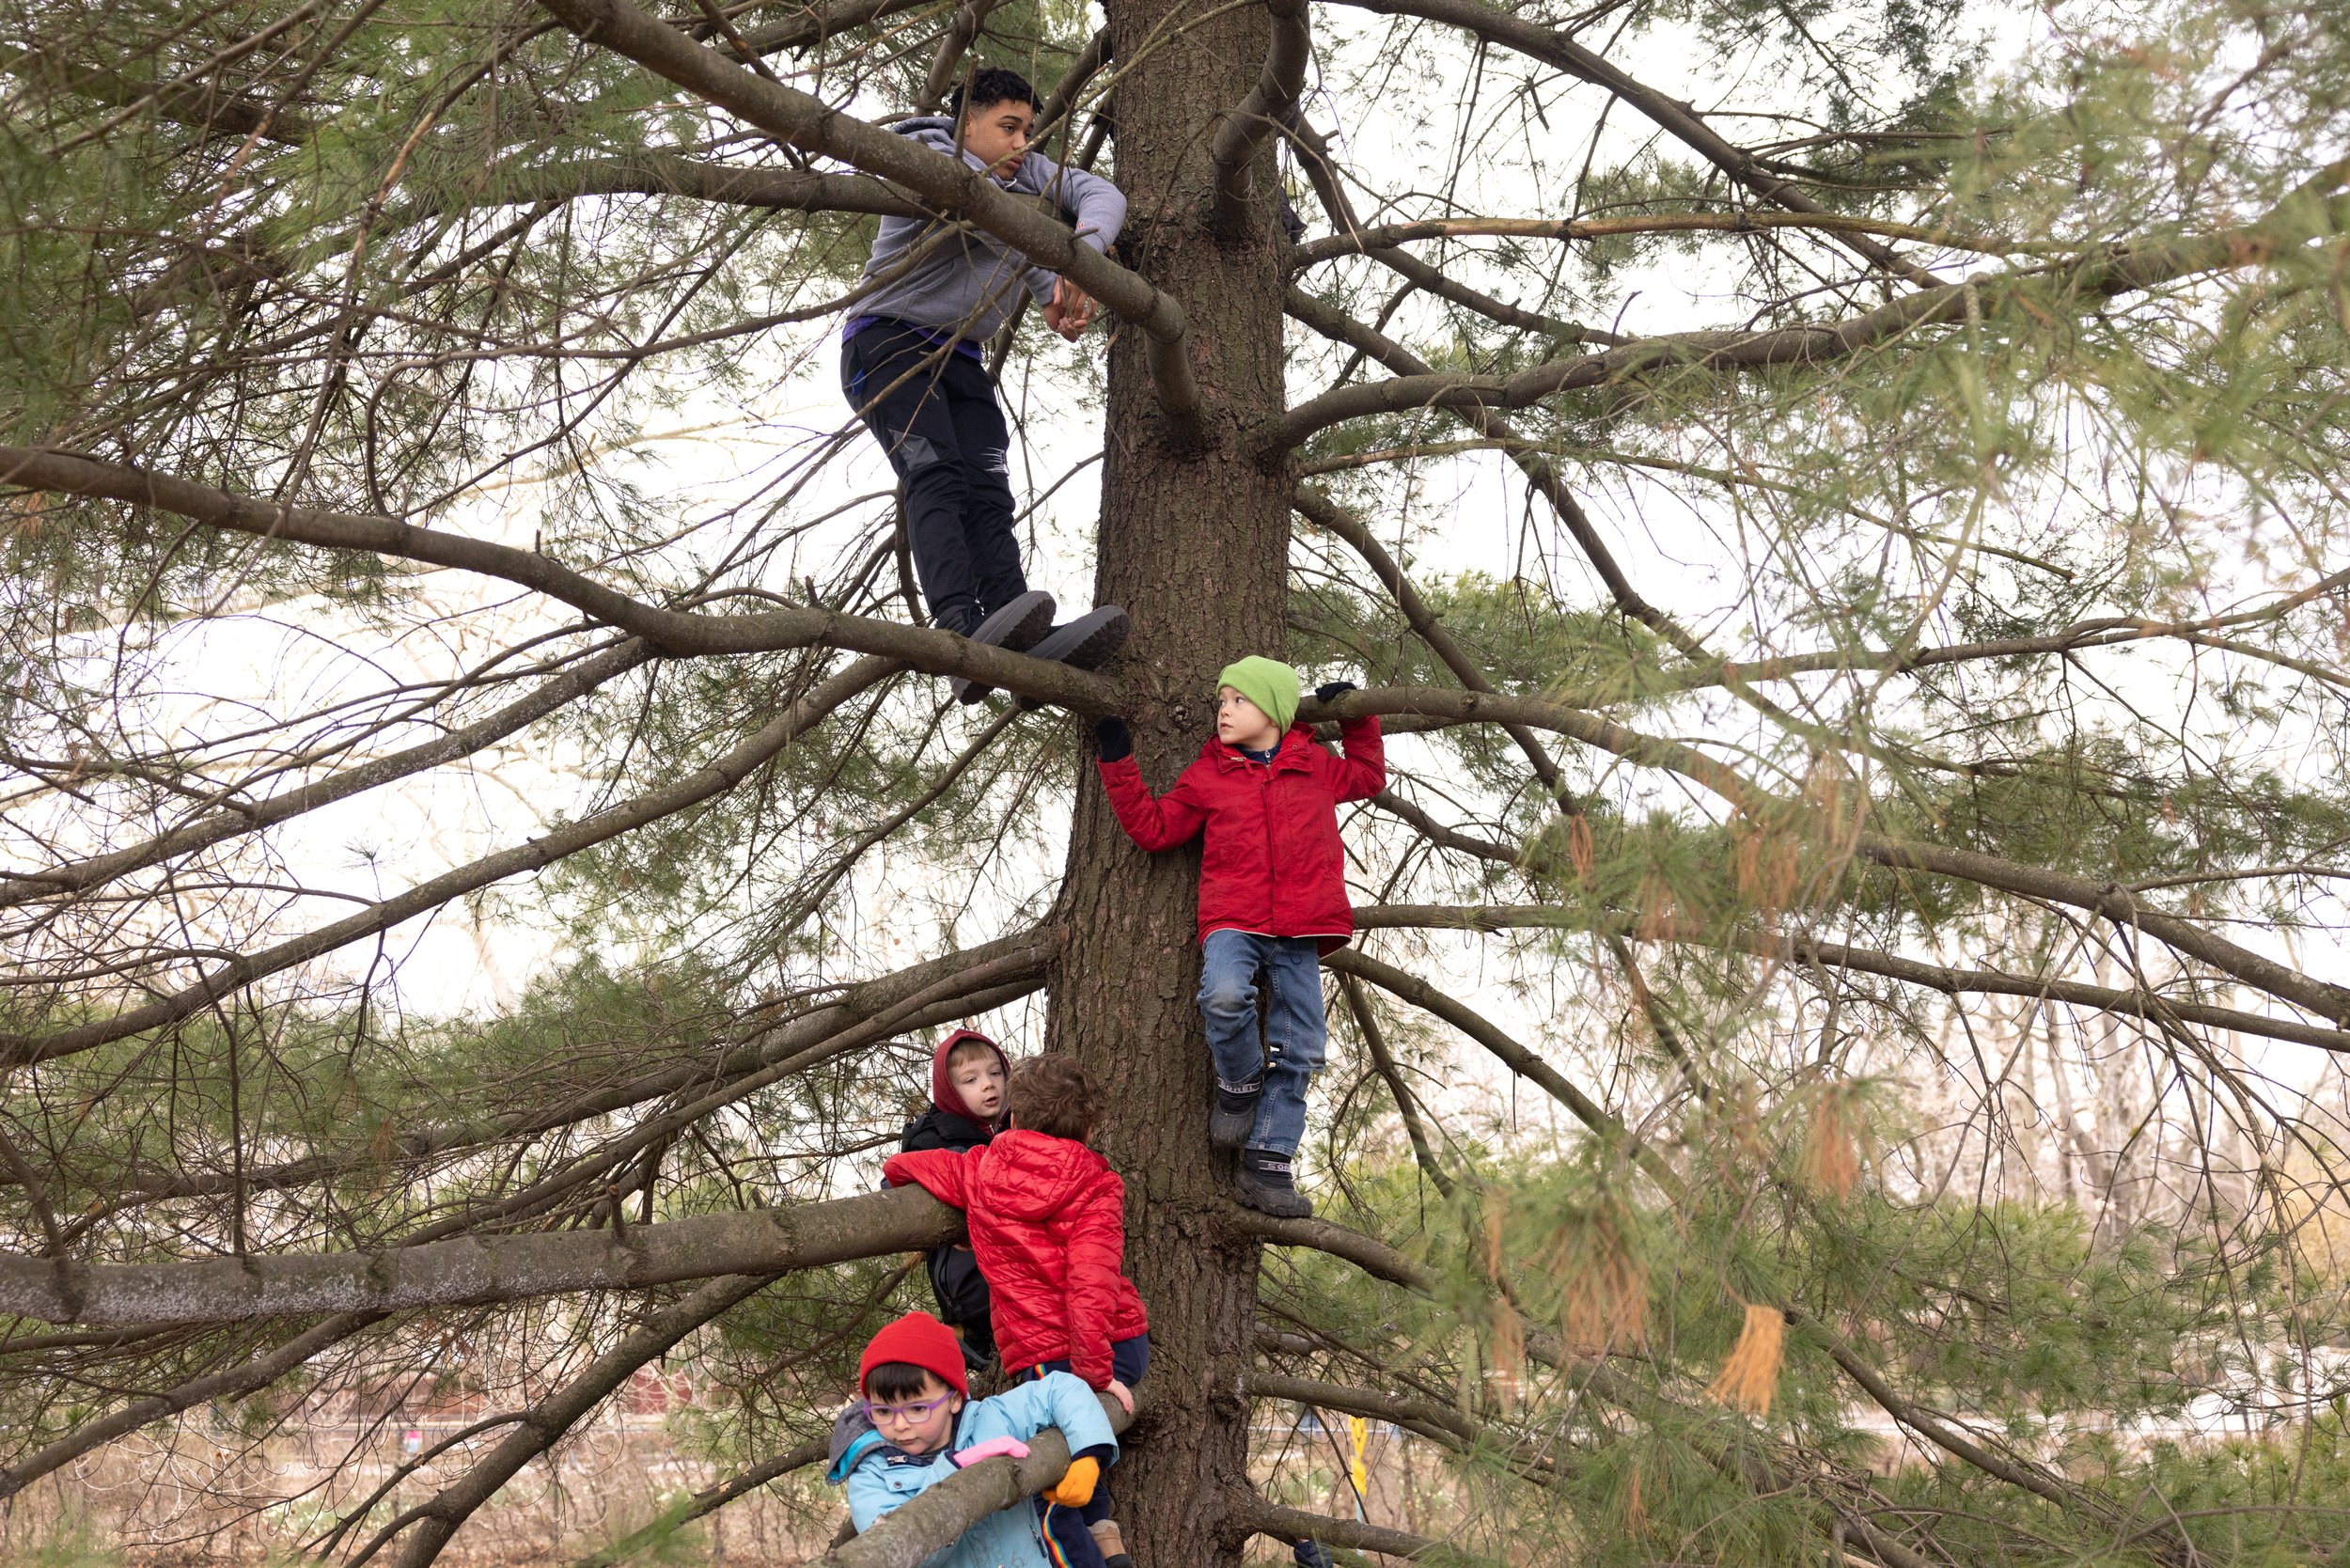  Willem Sichling (center in green cap), 6, climbed a tree with other children including (from top, facing forward) Duncan Hagens, 14; Marcus McDonough, 6; and Hans Deronne, 5; during Wilderkids Urban Forest School's Spring Break Camp on March 21 at F